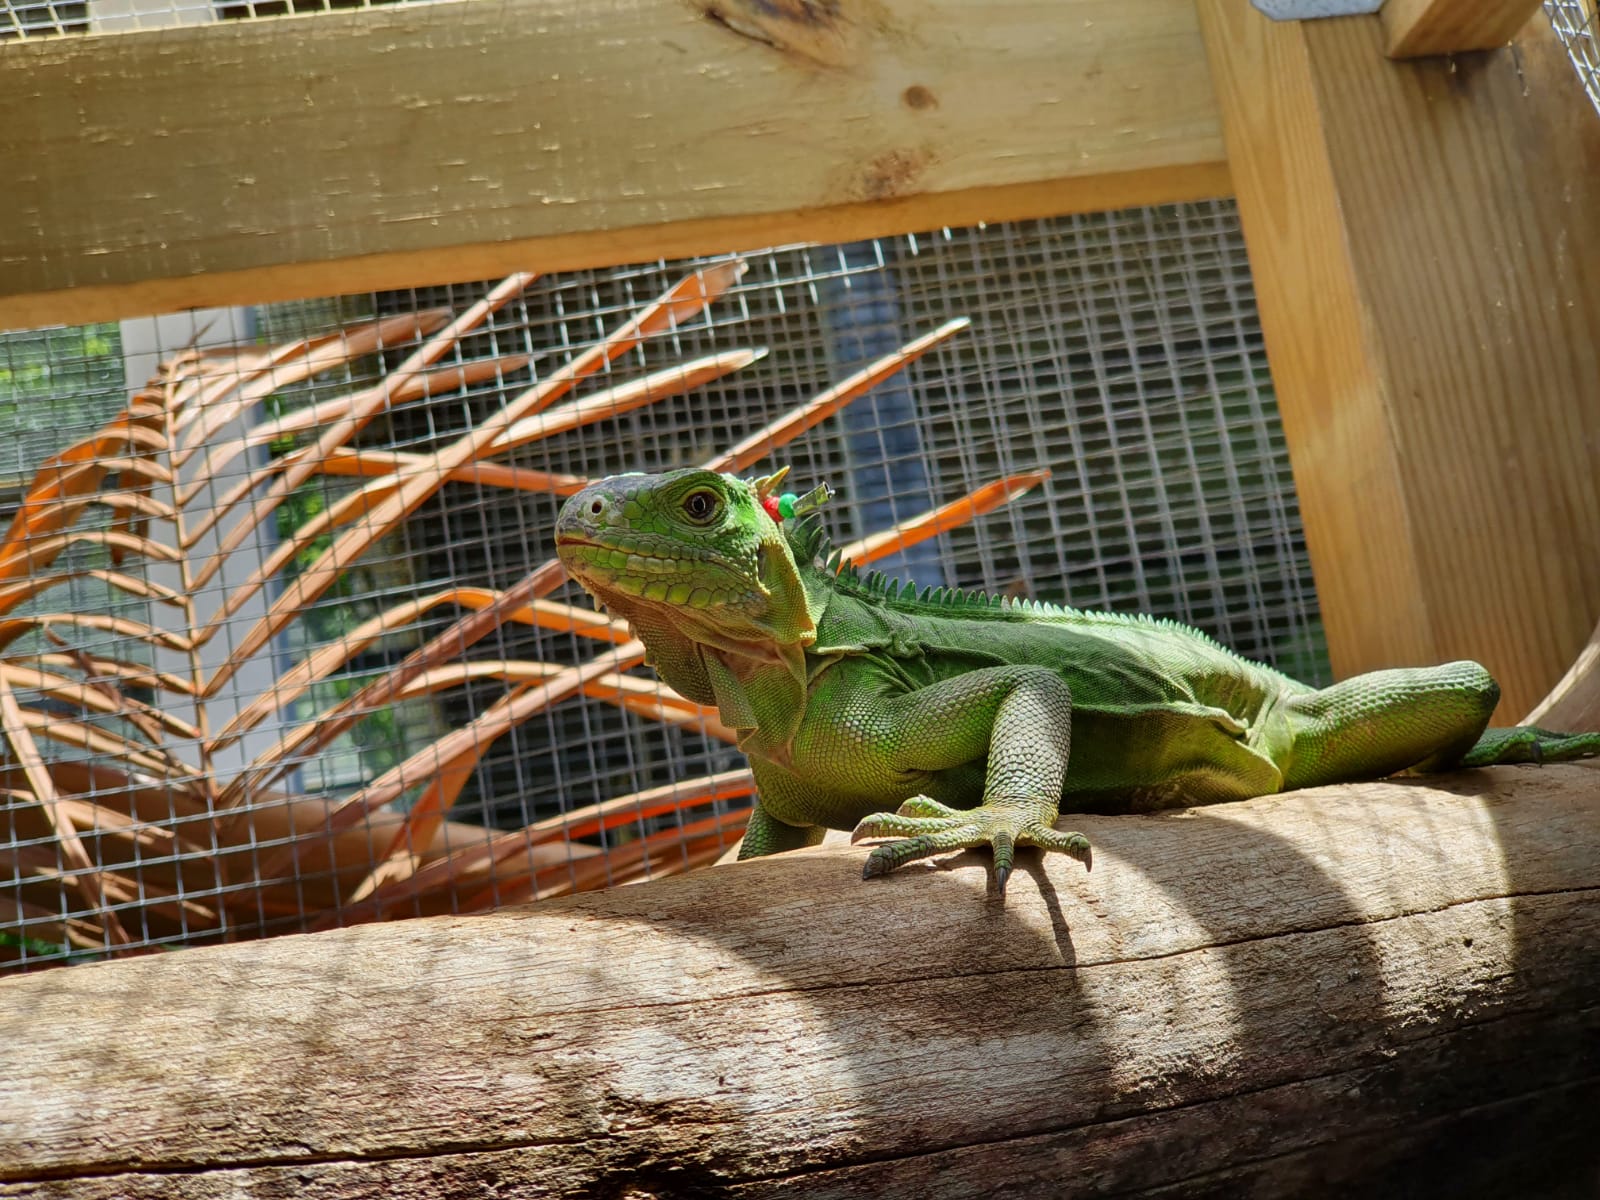 A Lesser Antillean Iguana originally from the Caribbean island of Dominica, translocated to Anguilla Island. (Photo by Anguilla National Trust)